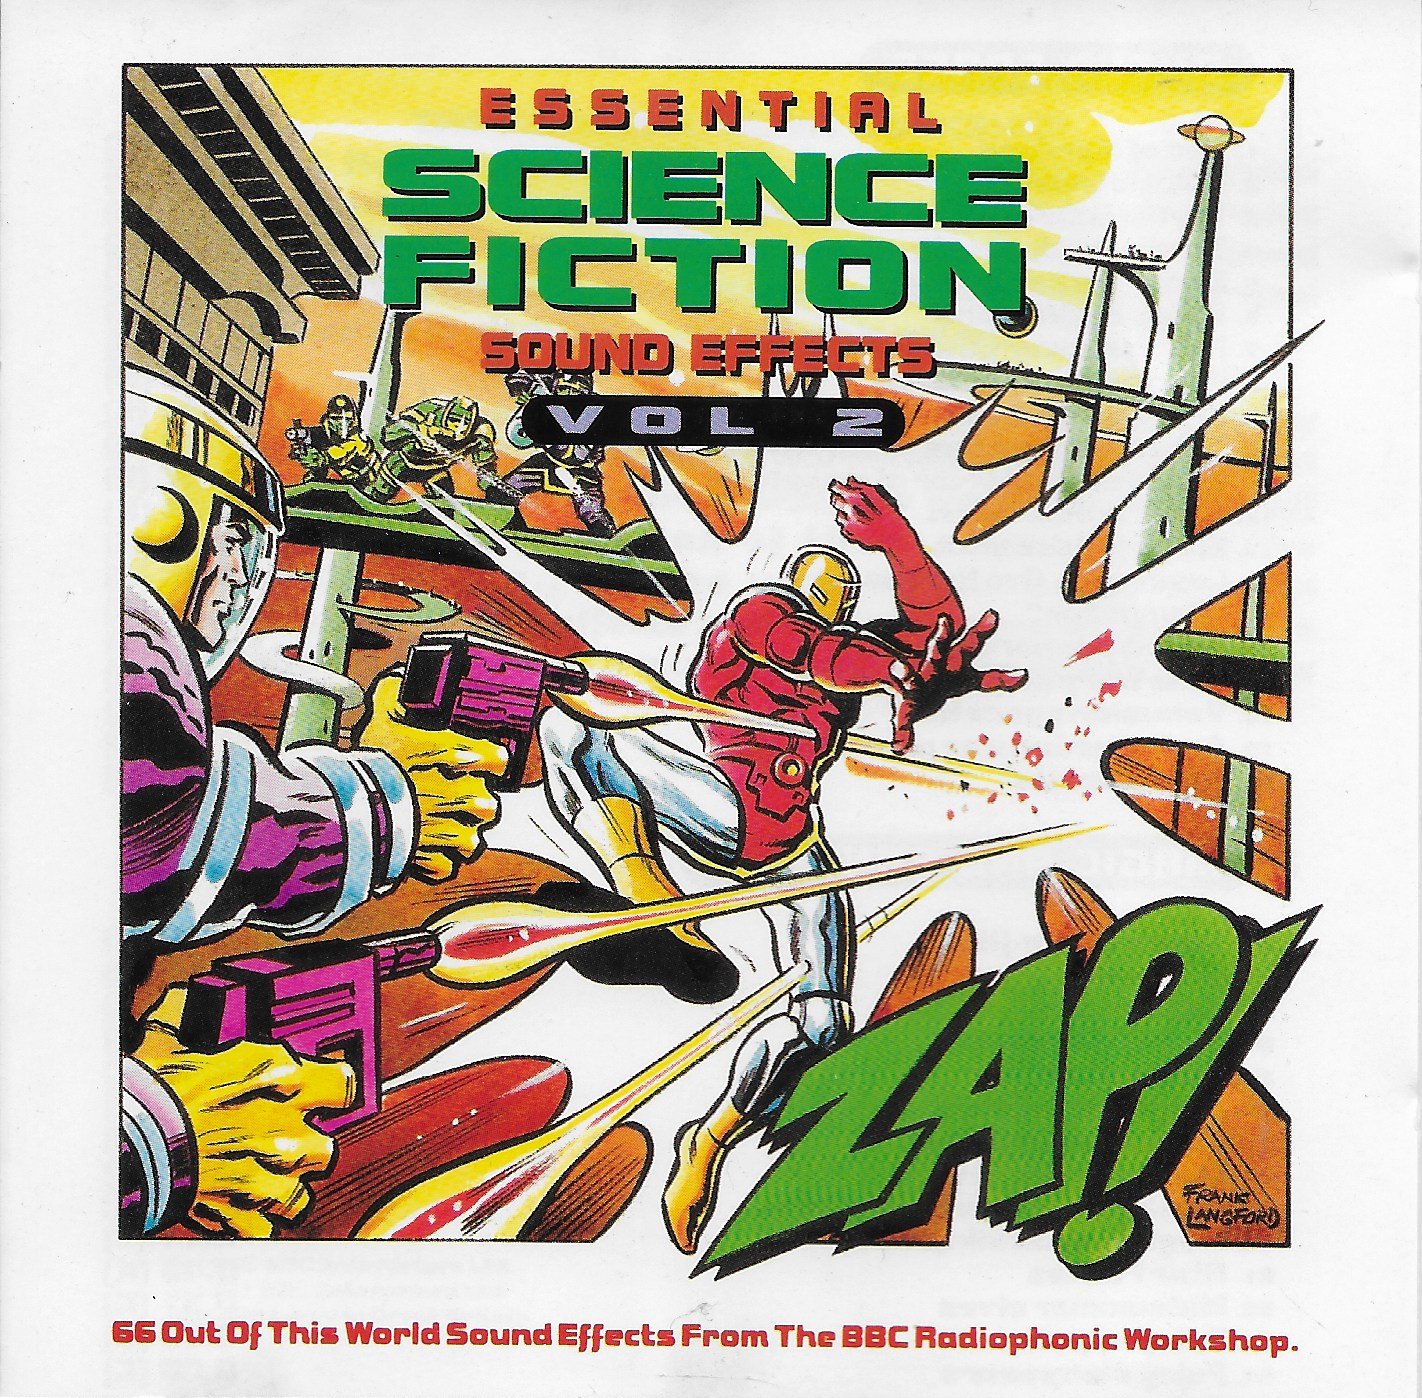 Picture of Essential science-fiction sound effects - Volume 2 by artist The BBC Radiophonic Workshop from the BBC cds - Records and Tapes library